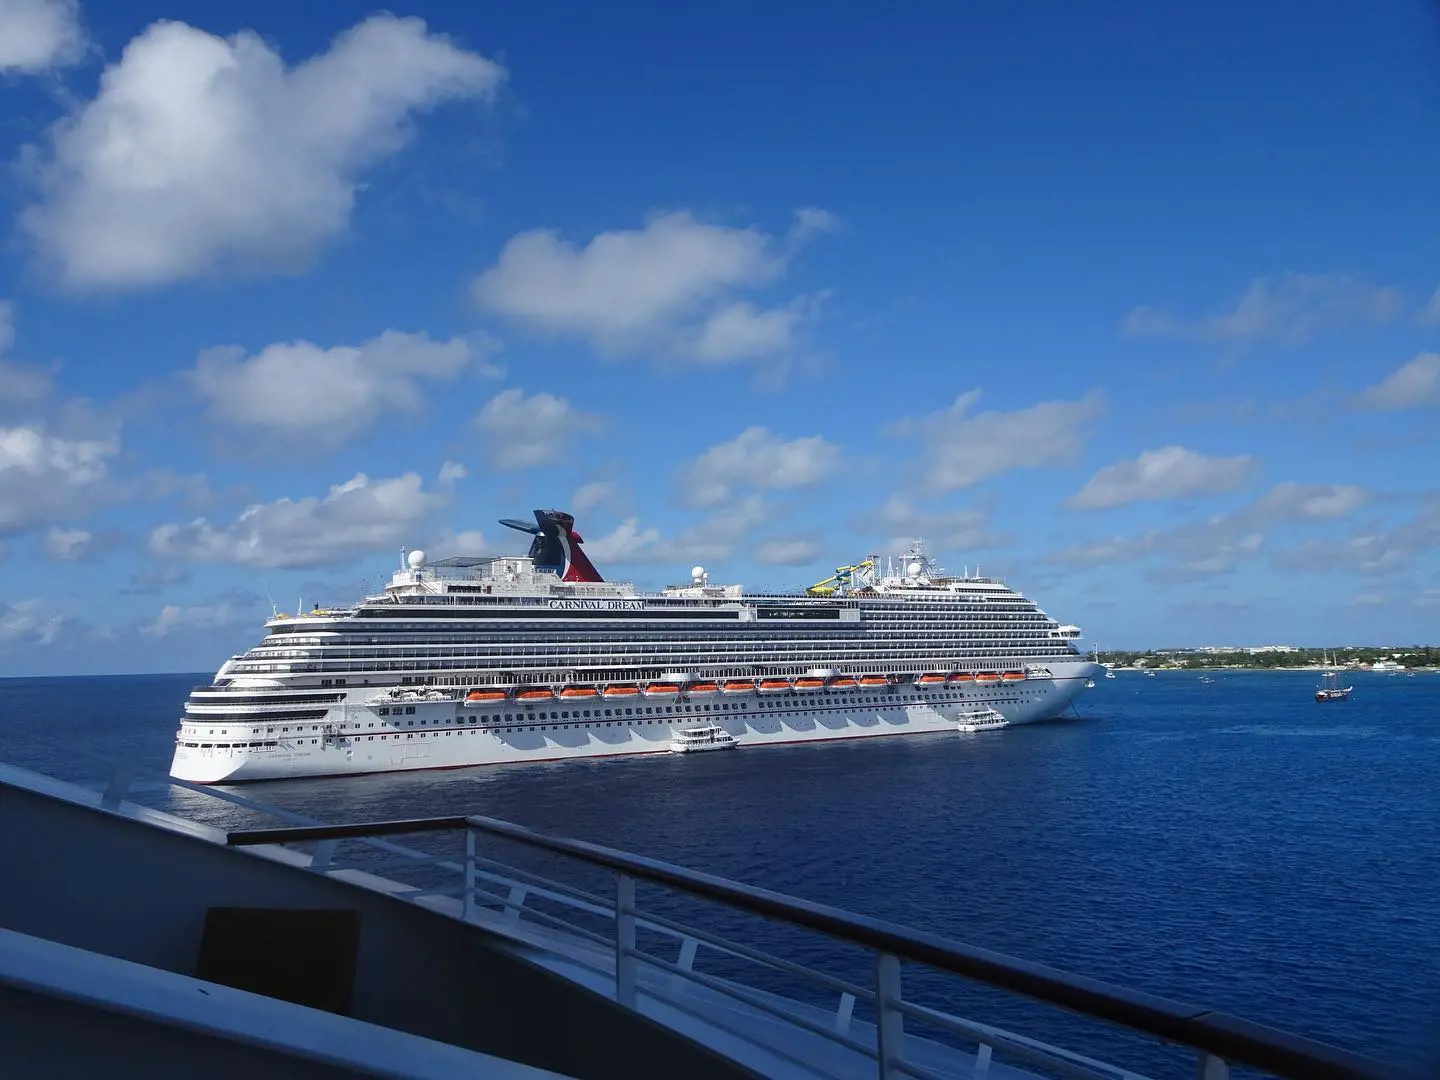 Carnival Dream sailing near George Town Cruise Port in January 2021